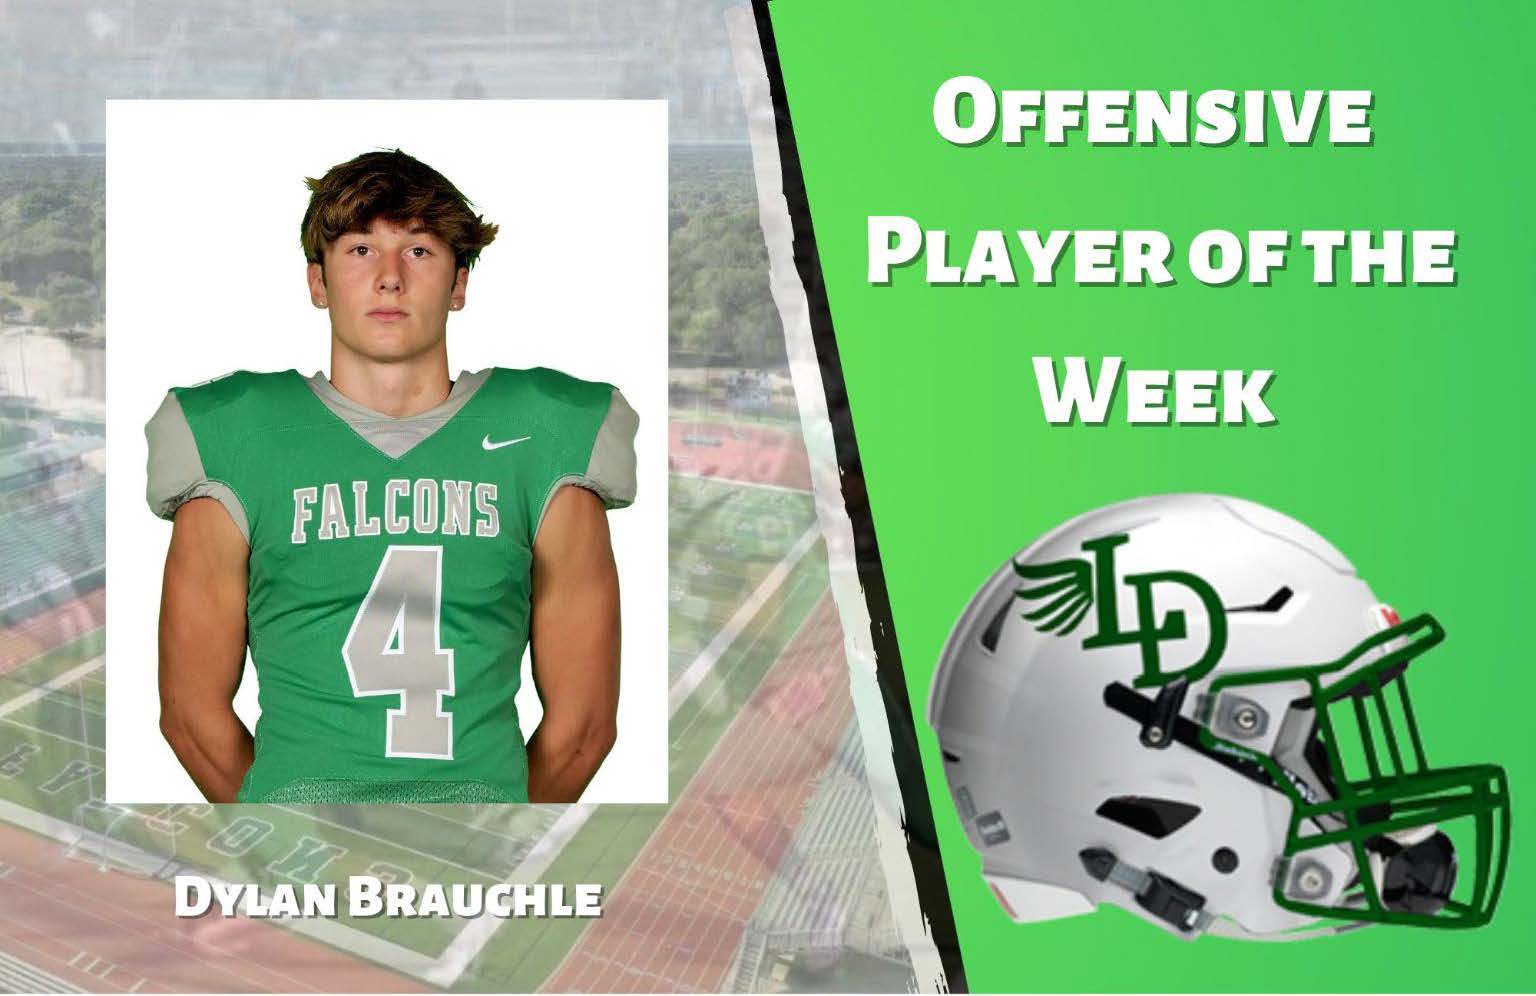 Players of the Week vs Greenville - Dylan Brauchle